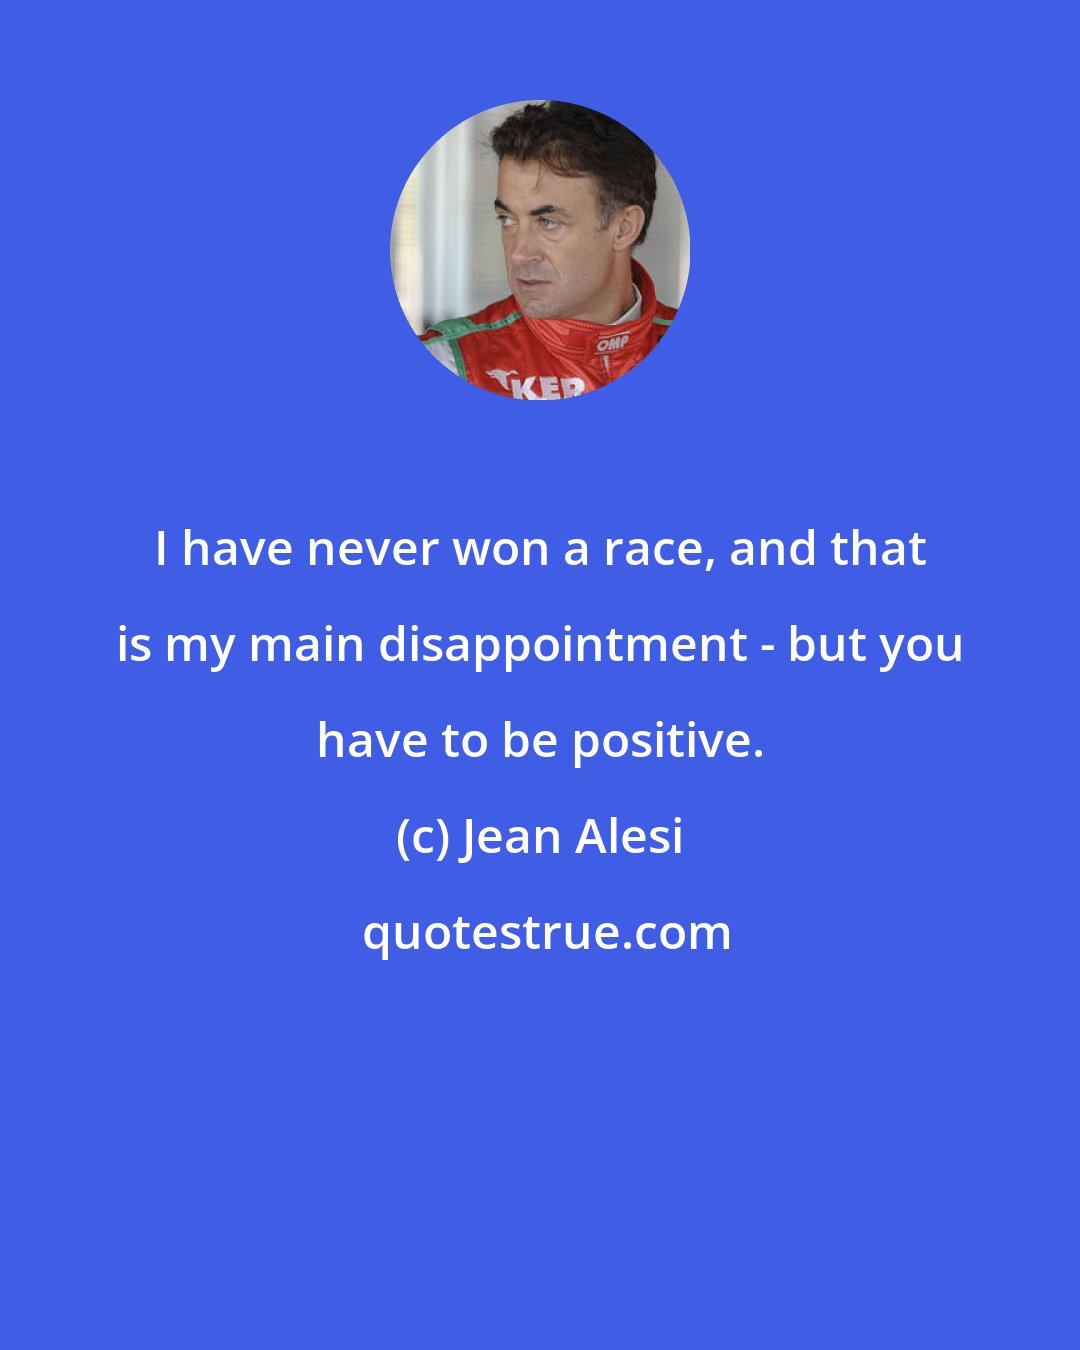 Jean Alesi: I have never won a race, and that is my main disappointment - but you have to be positive.